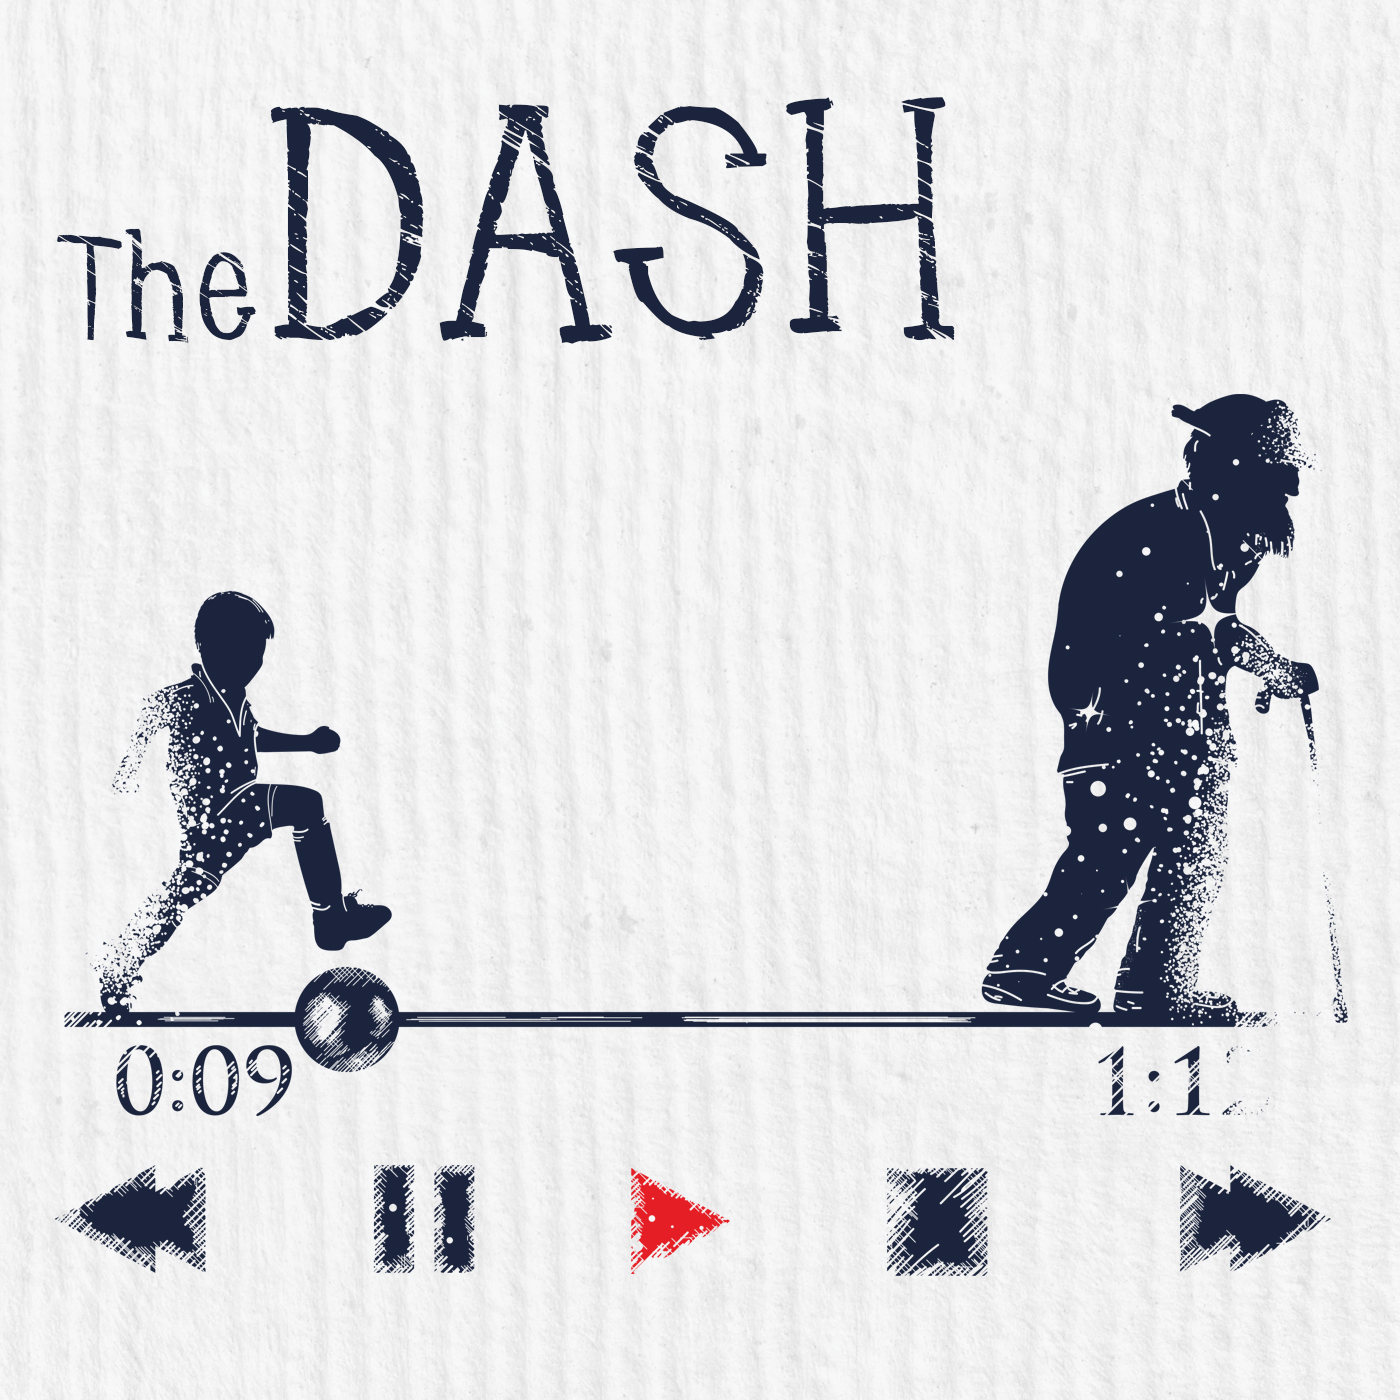 The Dash - Strength in Chaos - Chris Wall - 06-09-2019